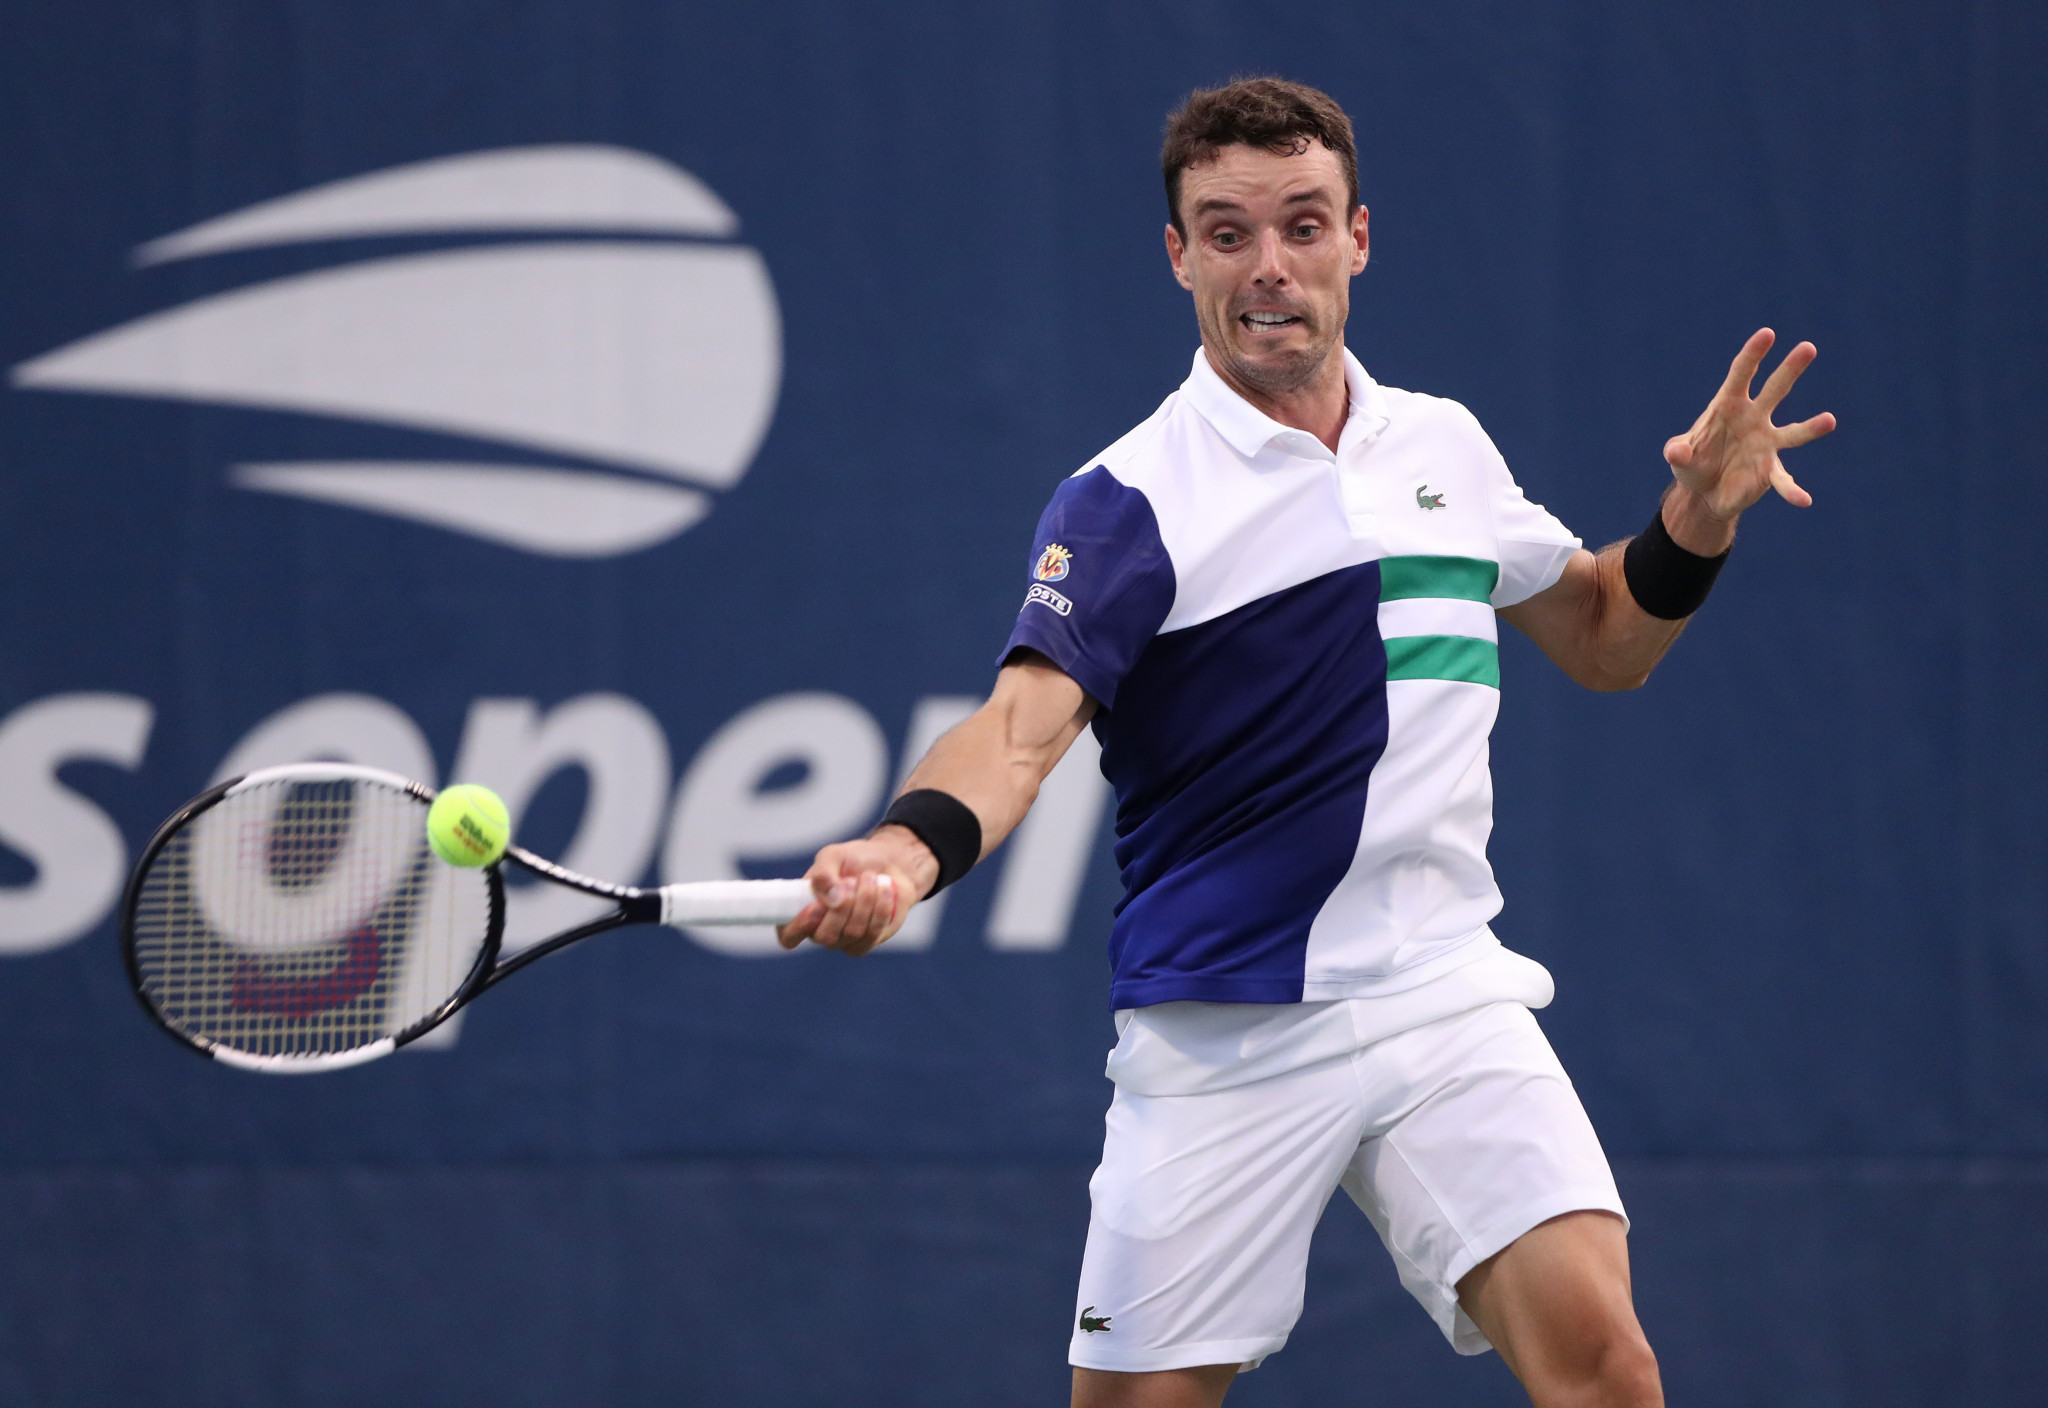 Roberto Bautista-Agut, the eighth seed, beat Miomir Kecmanovic of Serbia in four sets to reach the third round ©Getty Images